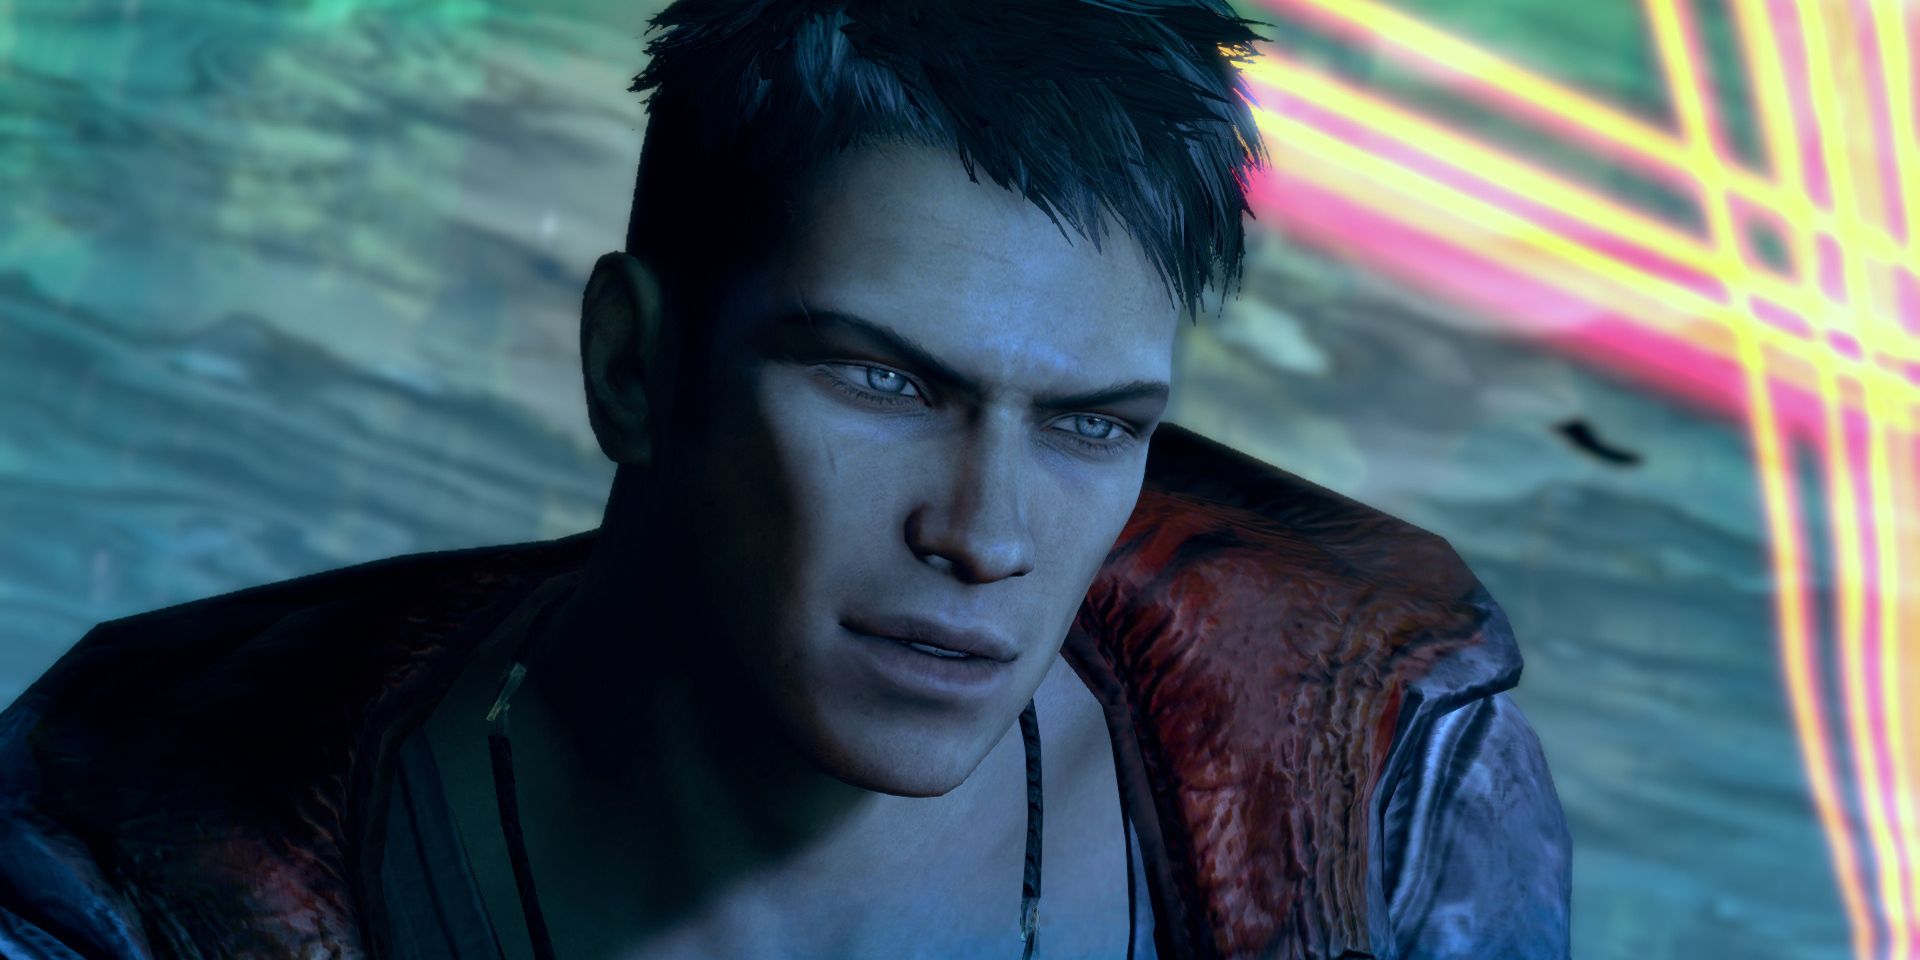 DMC: Devil May Cry” Gets Release Date!